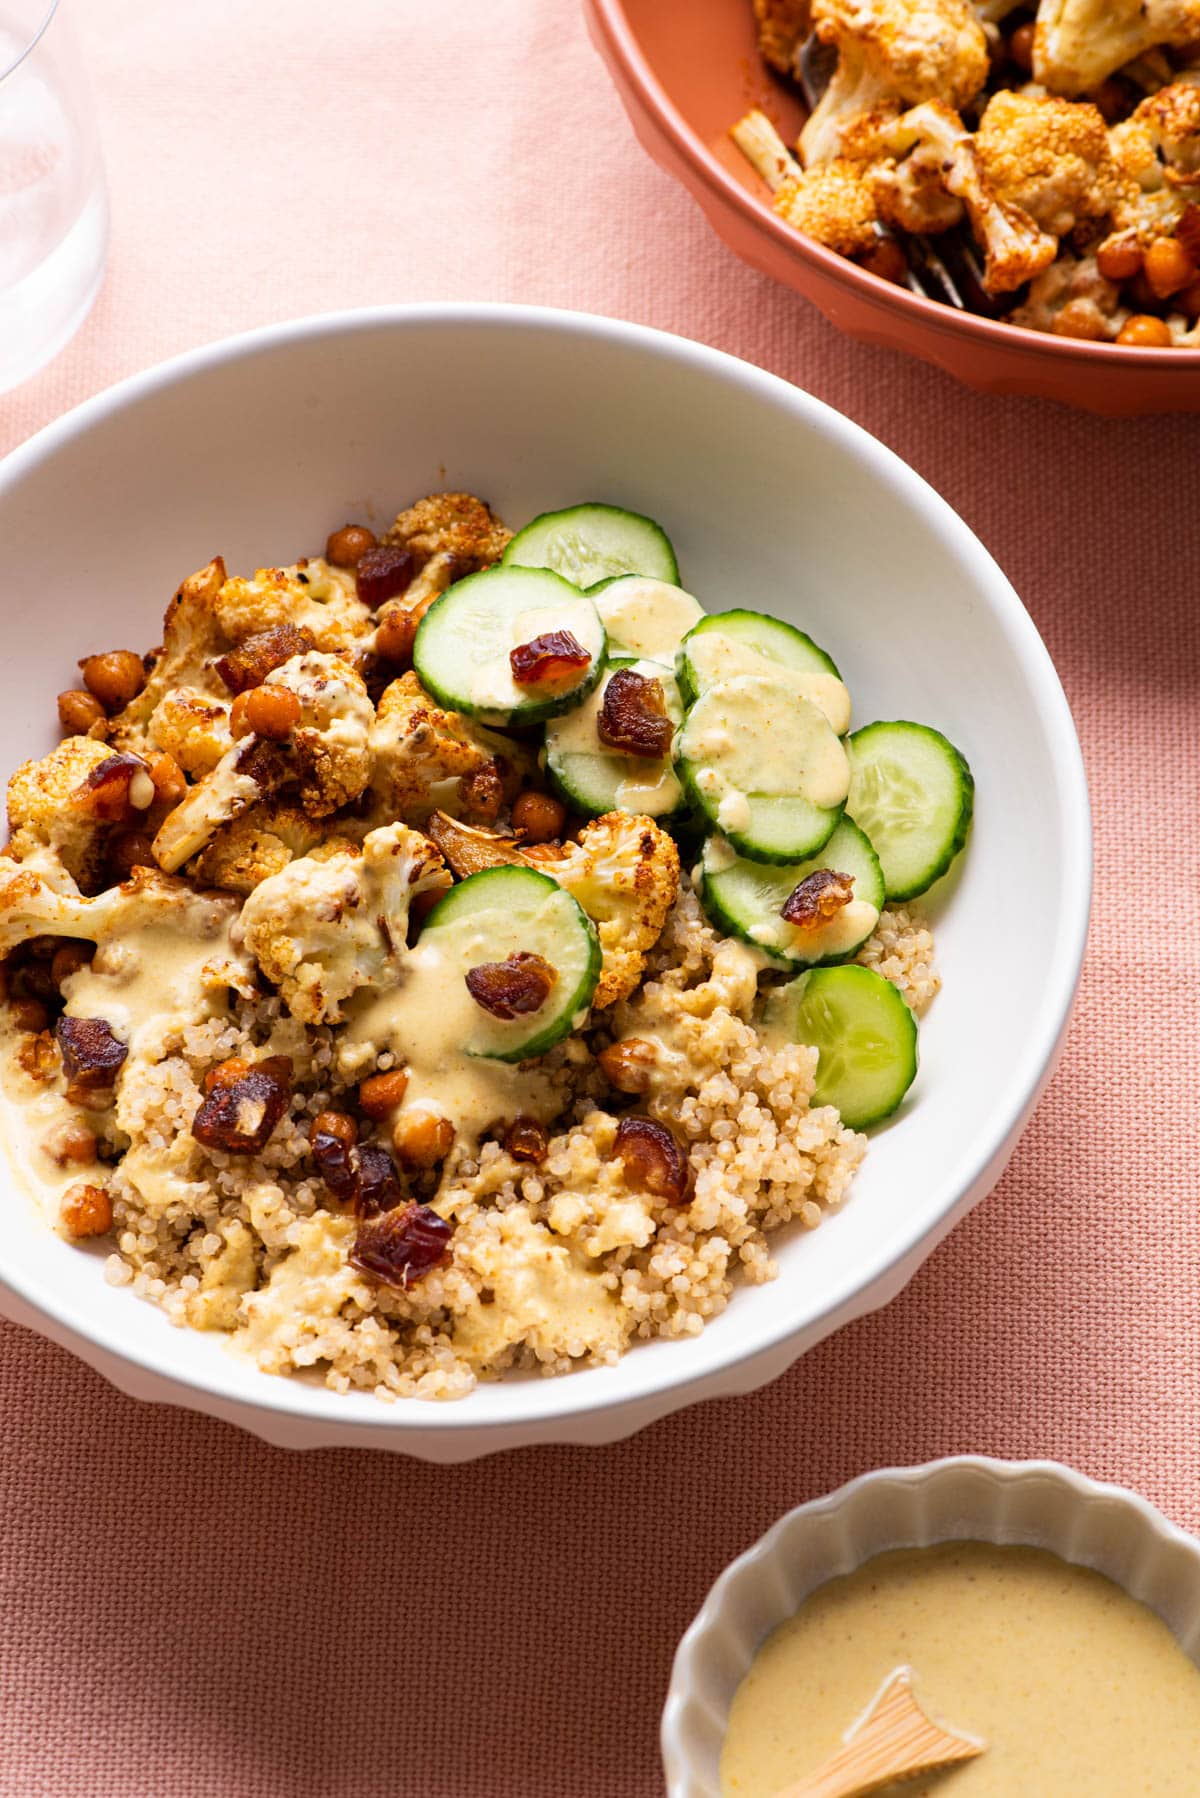 Roasted cauliflower and chickpea quinoa bowls with tahini dressing, cucumbers, and dates.